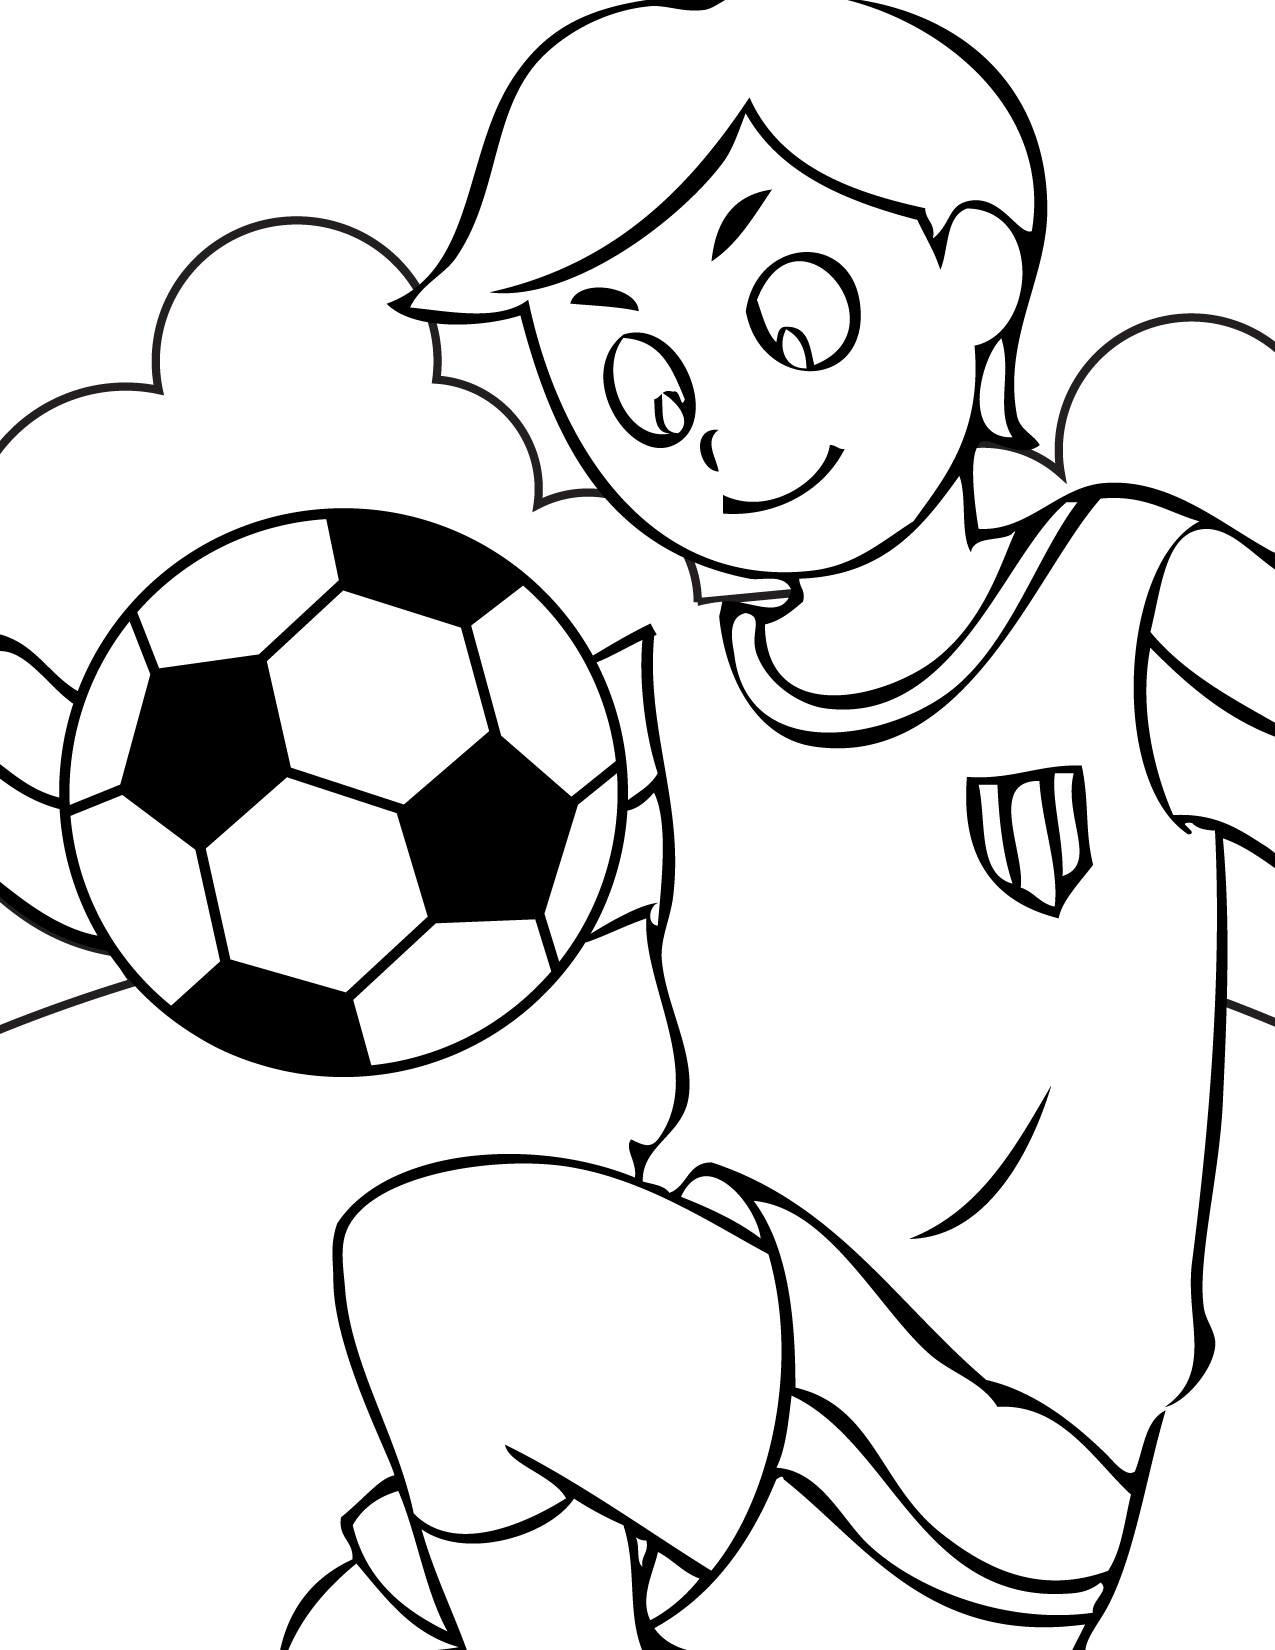 Free Coloring Pages For Boys Sports
 Free Printable Sports Coloring Pages For Kids